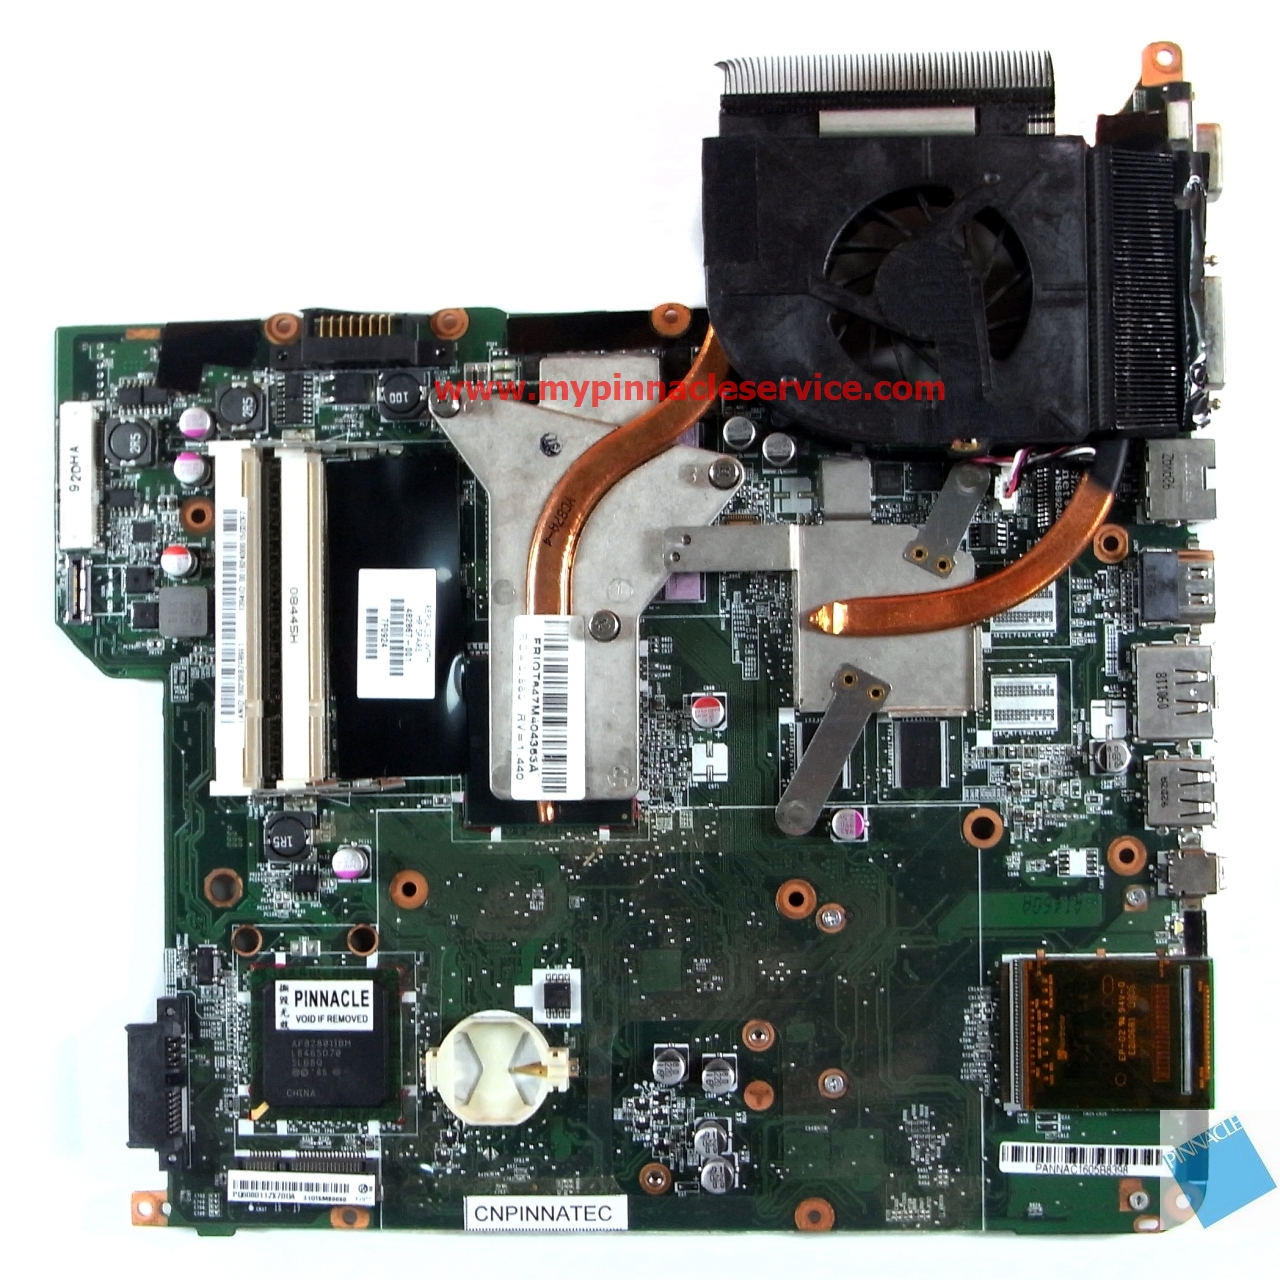 482867-001-with-cpu-motherboard-for-hp-dv5-pm45-chipset-instead-482324-001-502638-001-rimg0003.jpg